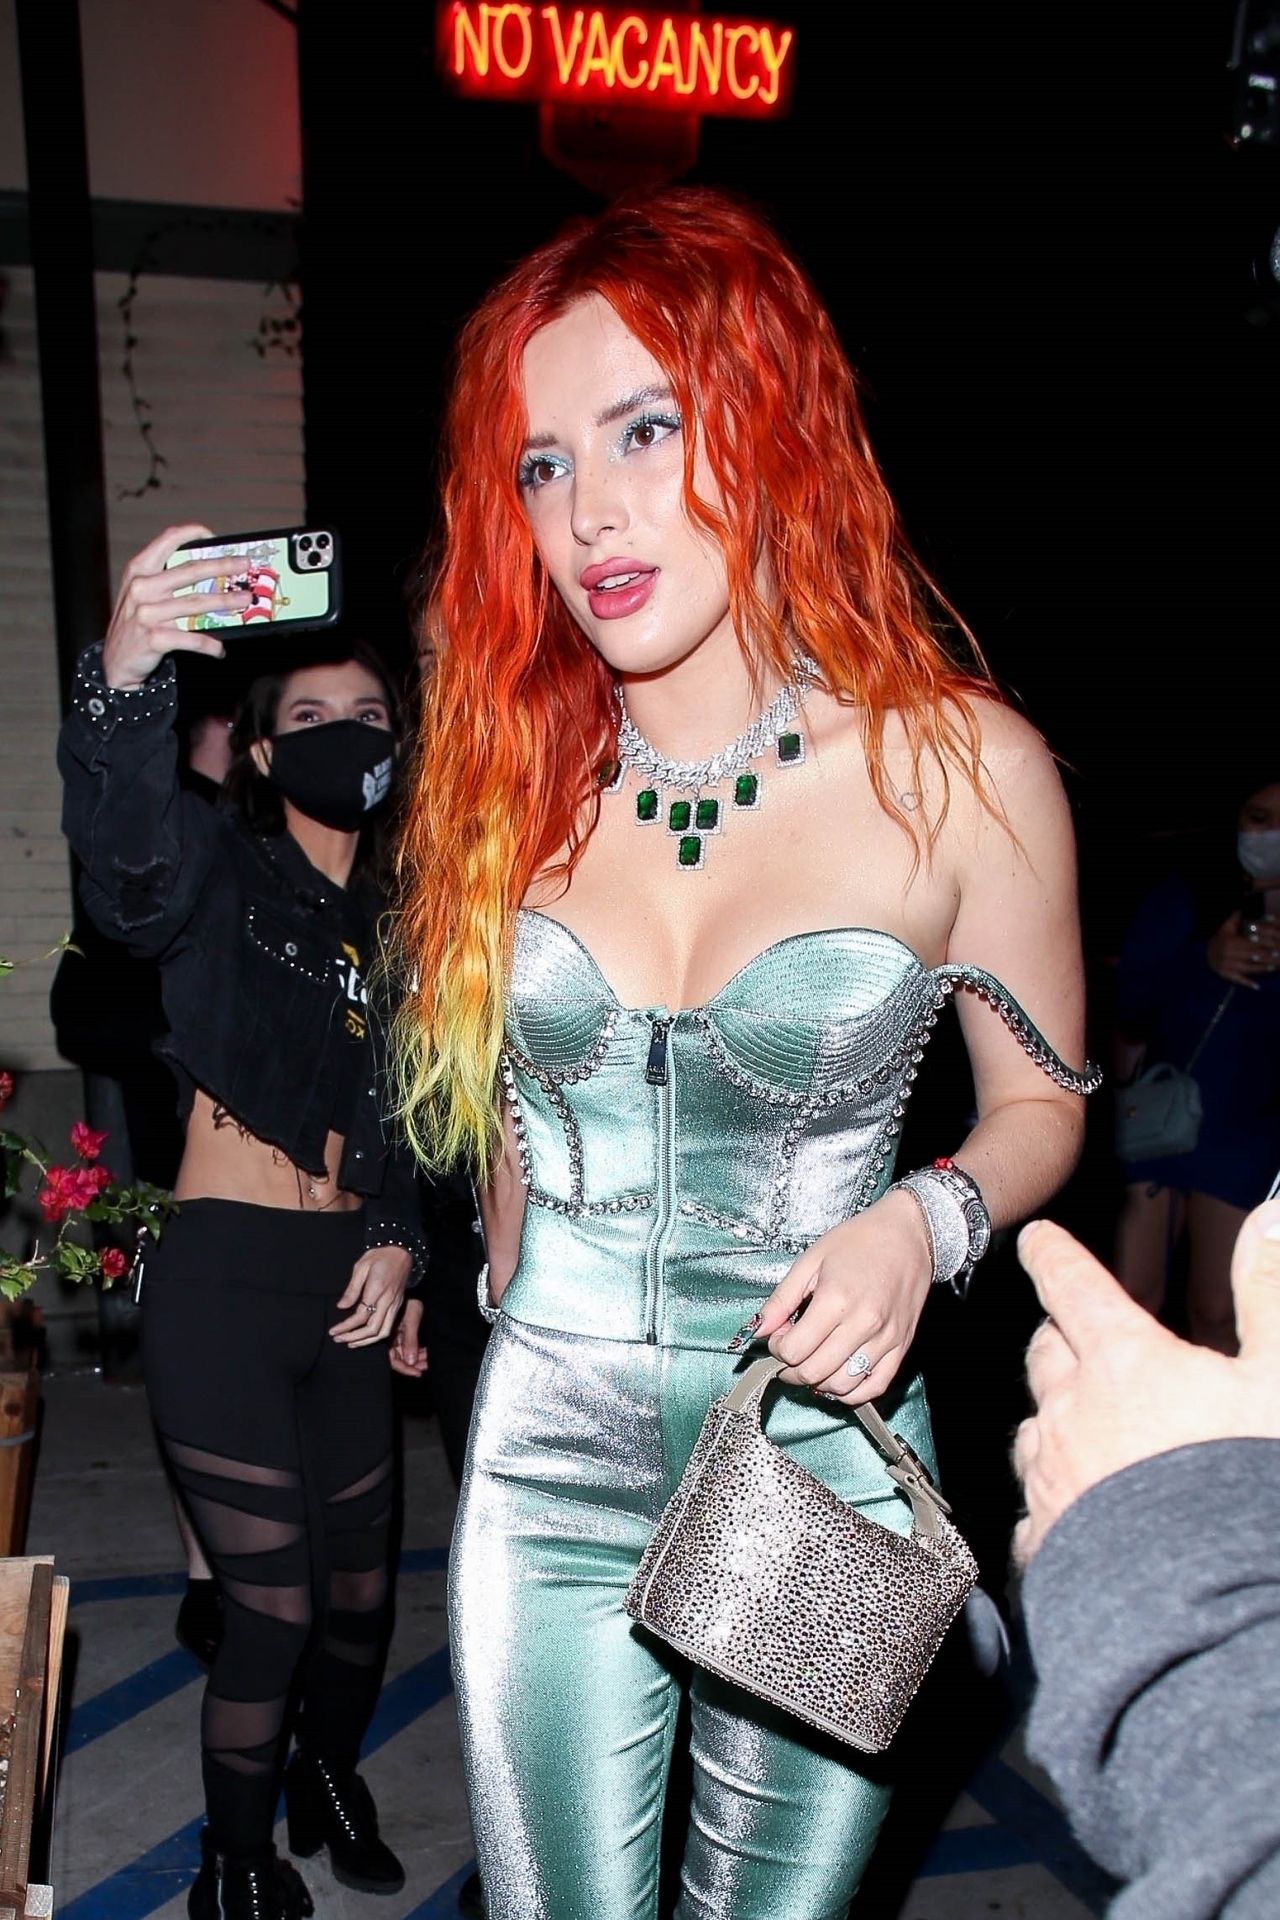 A Newly Engaged Bella Thorne Radiates Happiness in LA (82 Photos)